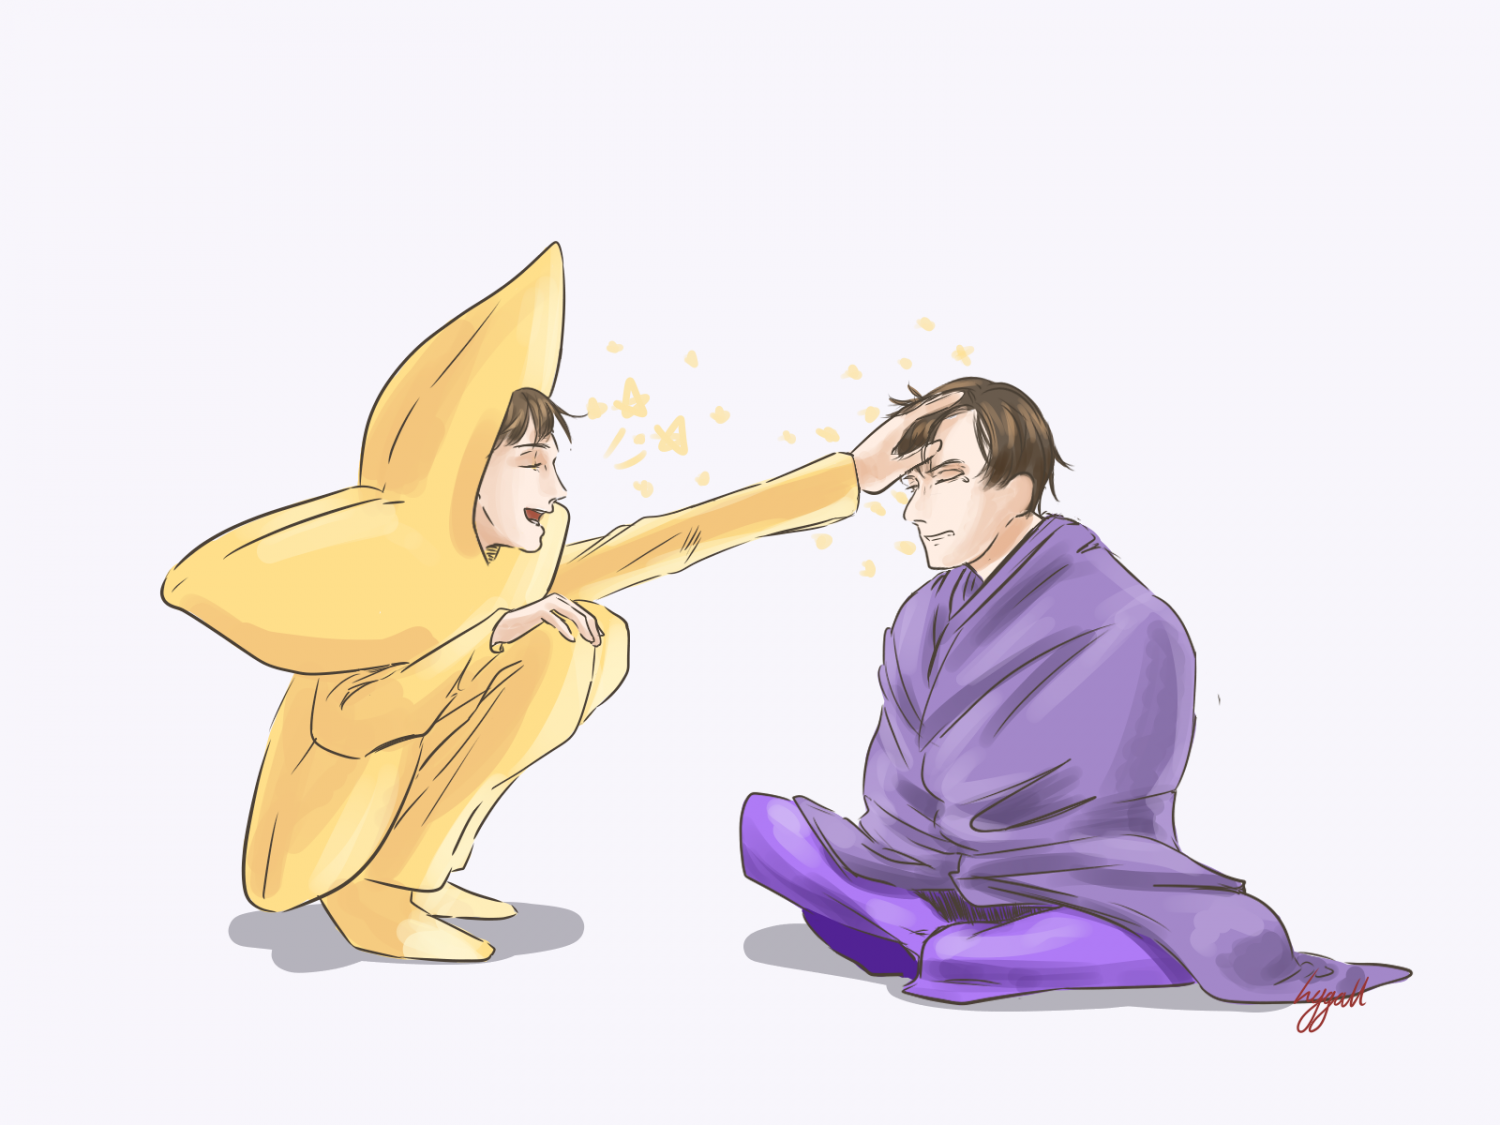 Star and Kevin in the puple blanket 2.png